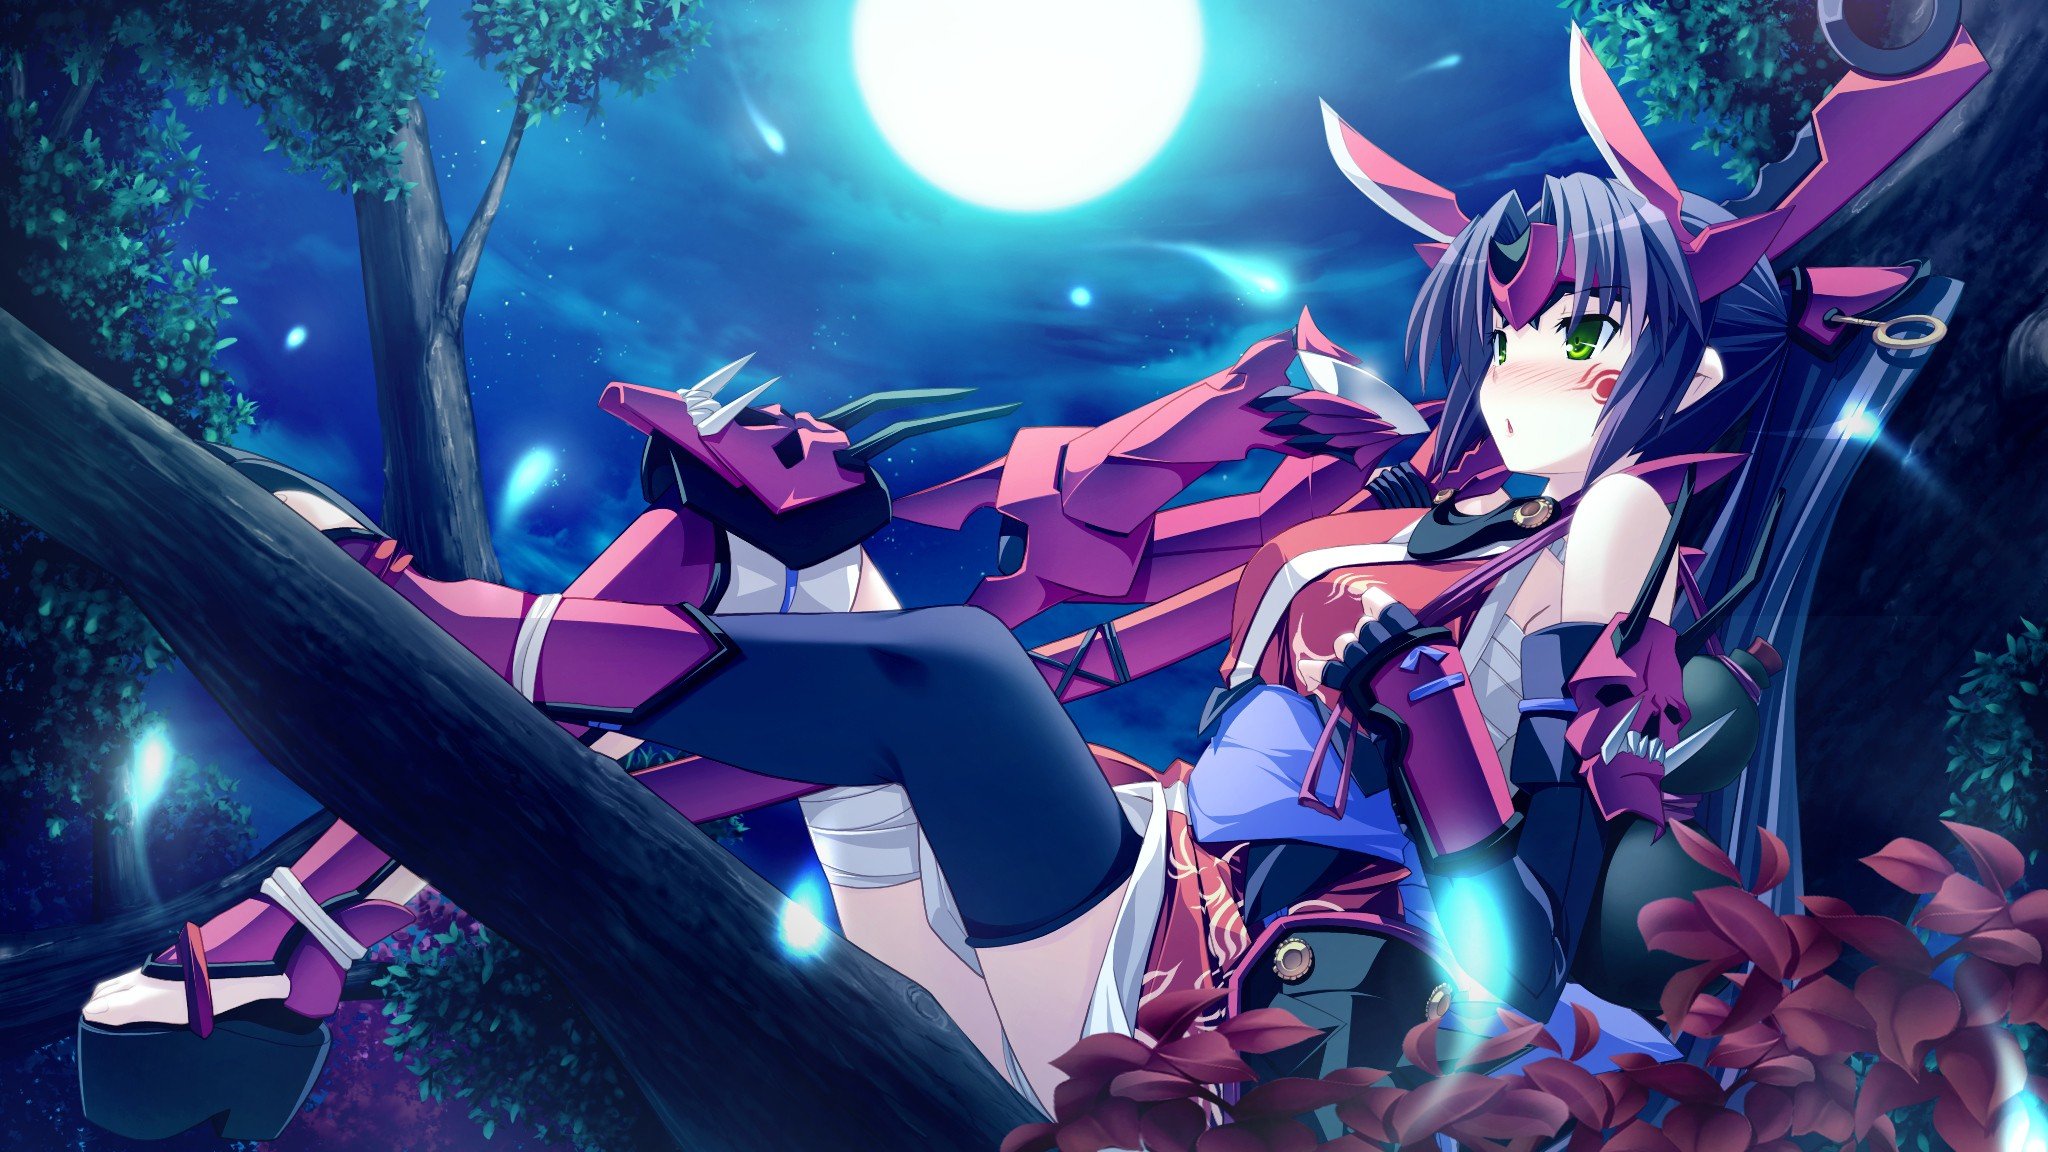 video, Games, Trees, Leaves, Moon, Long, Hair, Weapons, Green, Eyes, Purple, Hair, Visual, Novels, Thigh, Highs, Game, Cg, Blush, Ponytails, Sake, Skyscapes, Skyfish, Gauntlets, Swords, Drinking, Hair, Ornaments Wallpaper